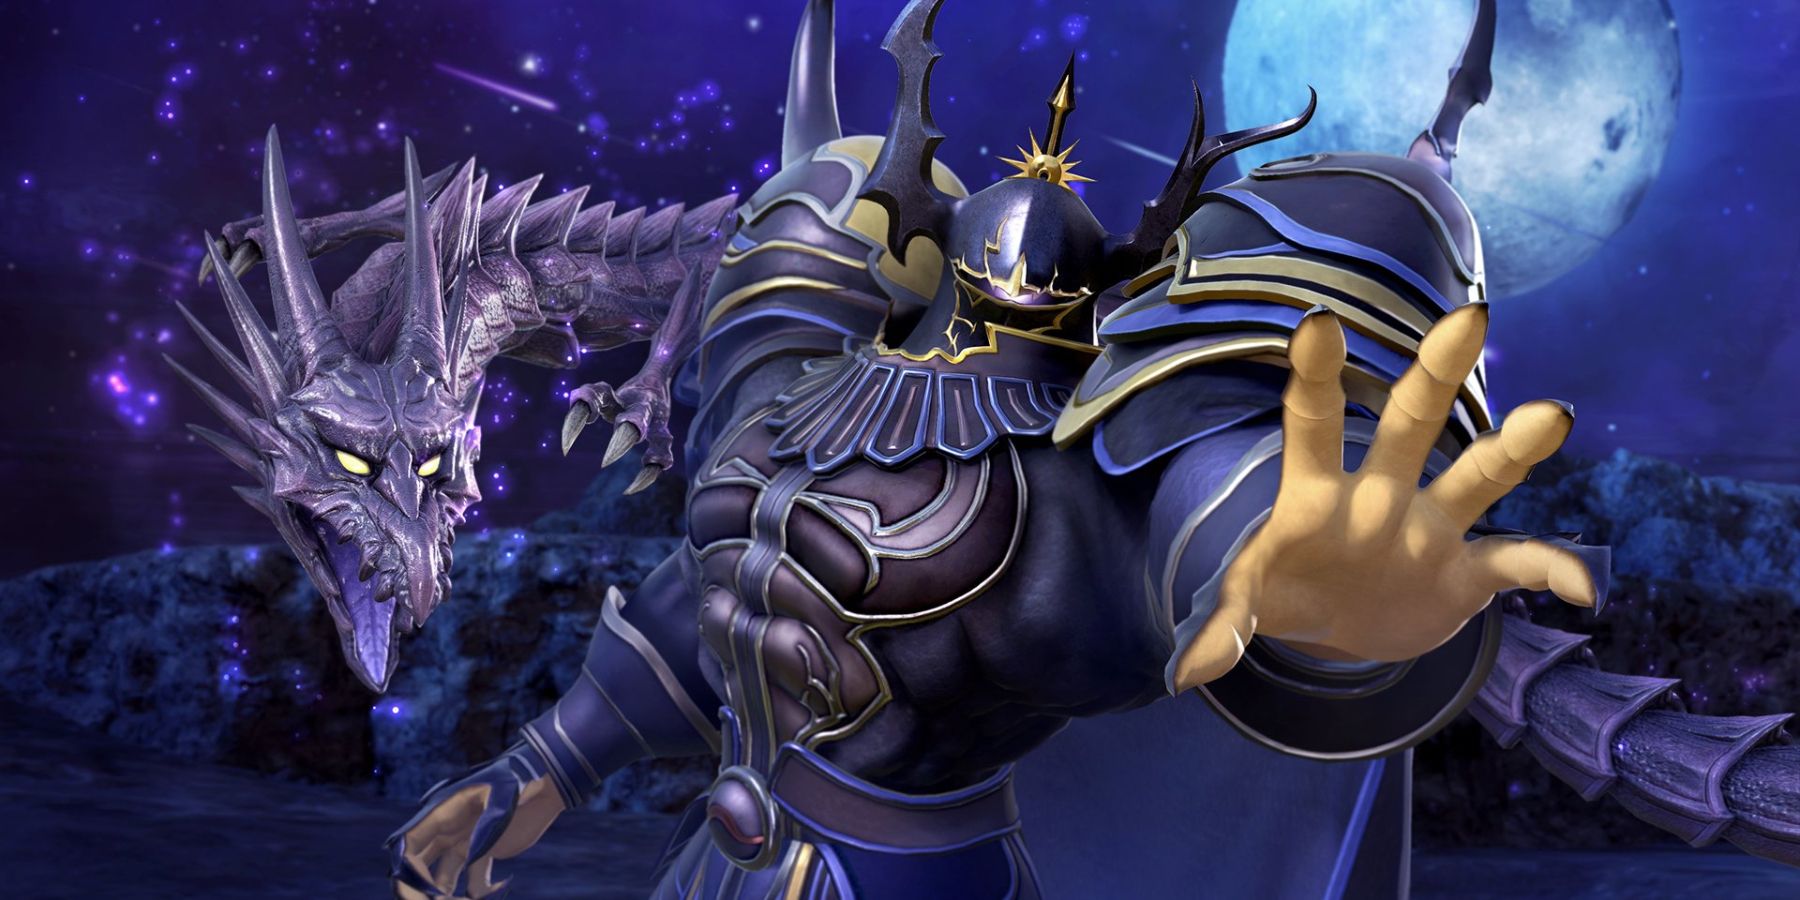 Based on his role in Final Fantasy 4, FFXIV's Golbez may have hidden motivations.